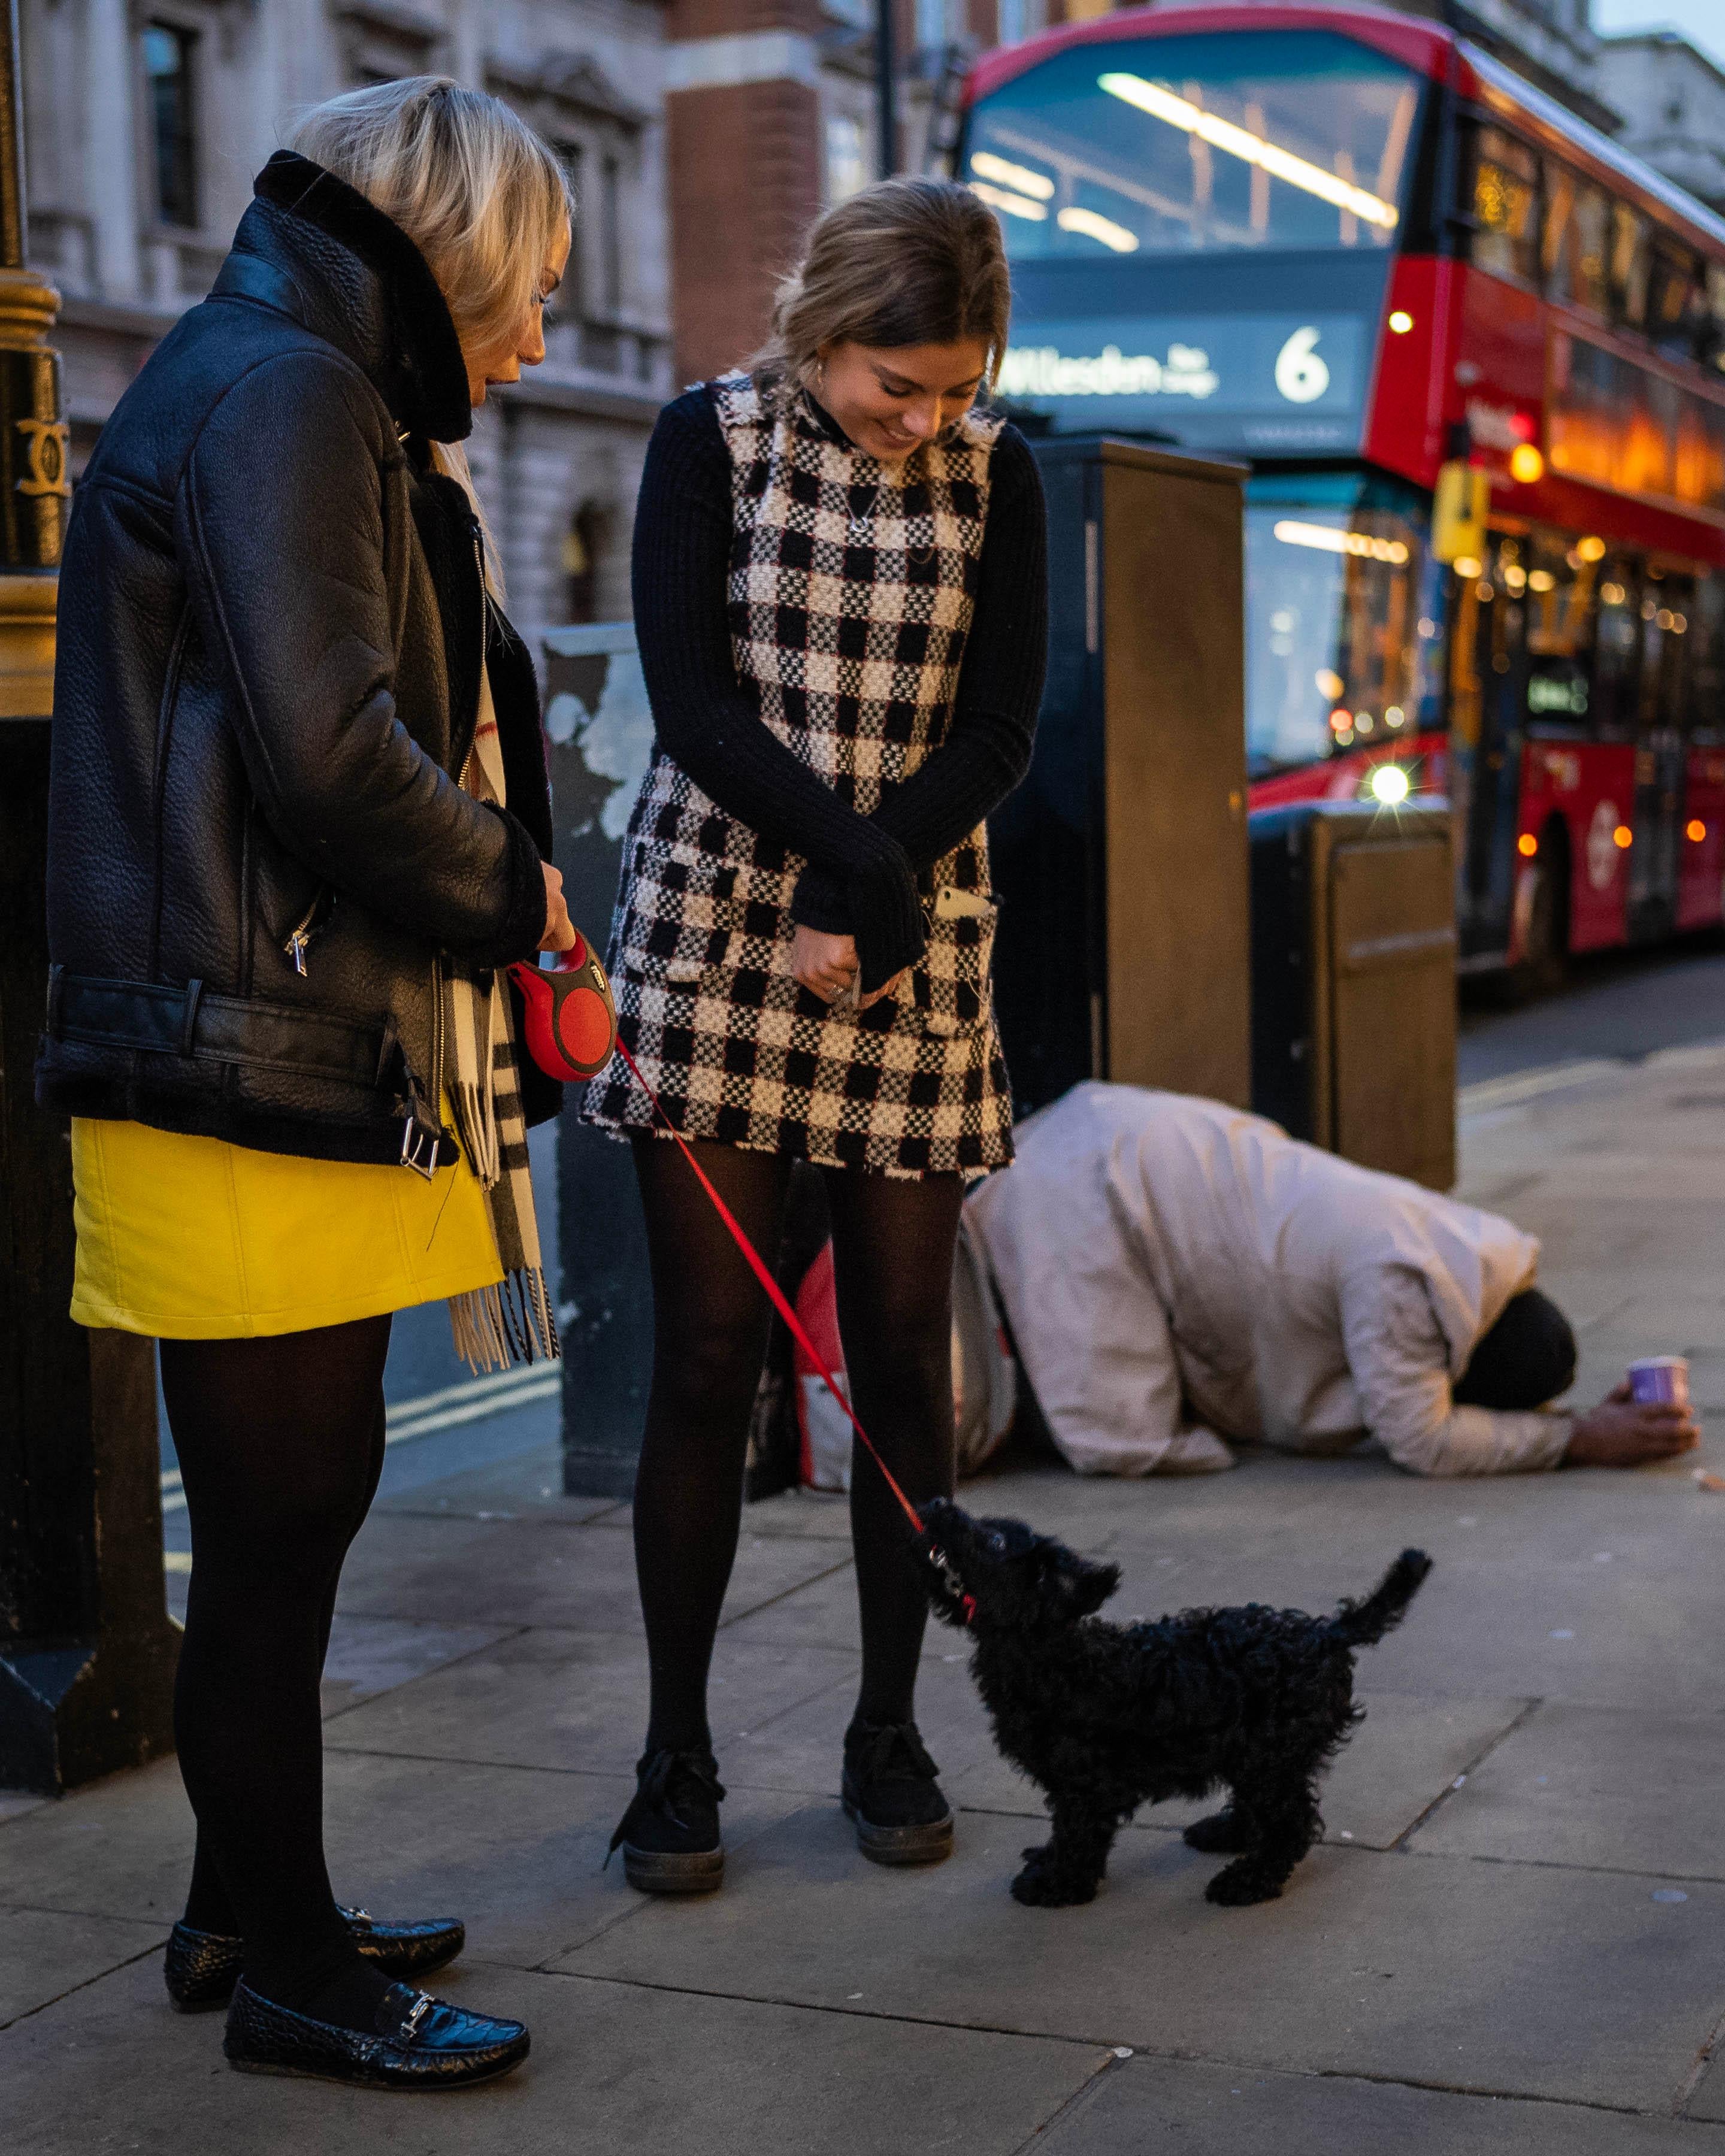 Pedestrian Dissonance
London, 2018

The disparity in quality of life captured by Whitford in this image is captivating. To look at this image is to get the sense that this moment could happen anywhere at any time. This photograph is at the same time